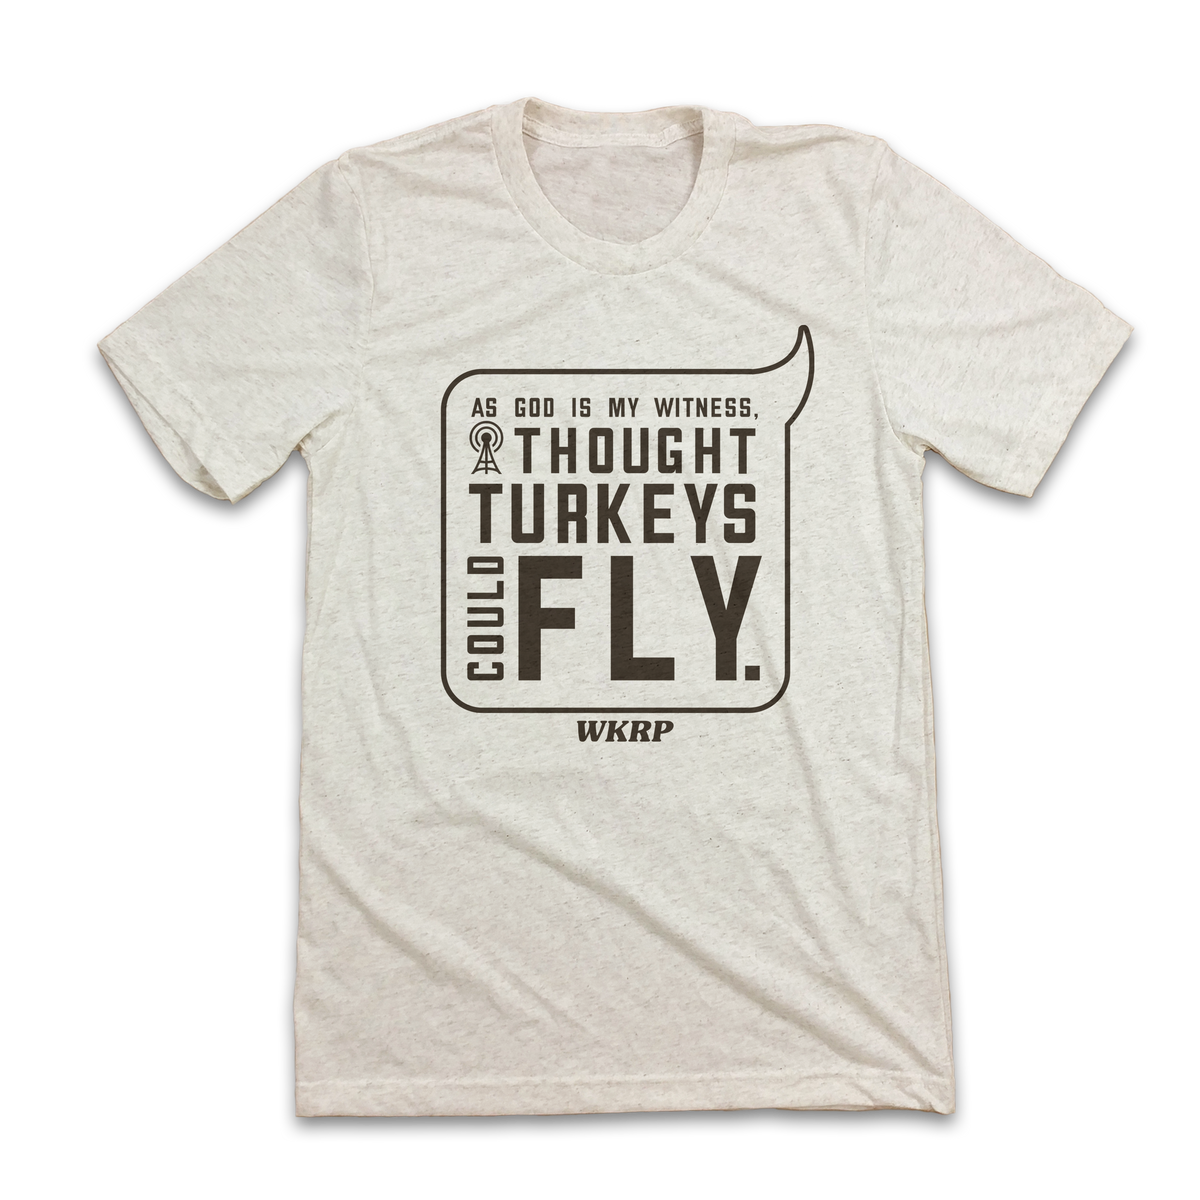 I Thought Turkeys Could Fly - WKRP Quote - Old School Shirts- Retro Sports T Shirts